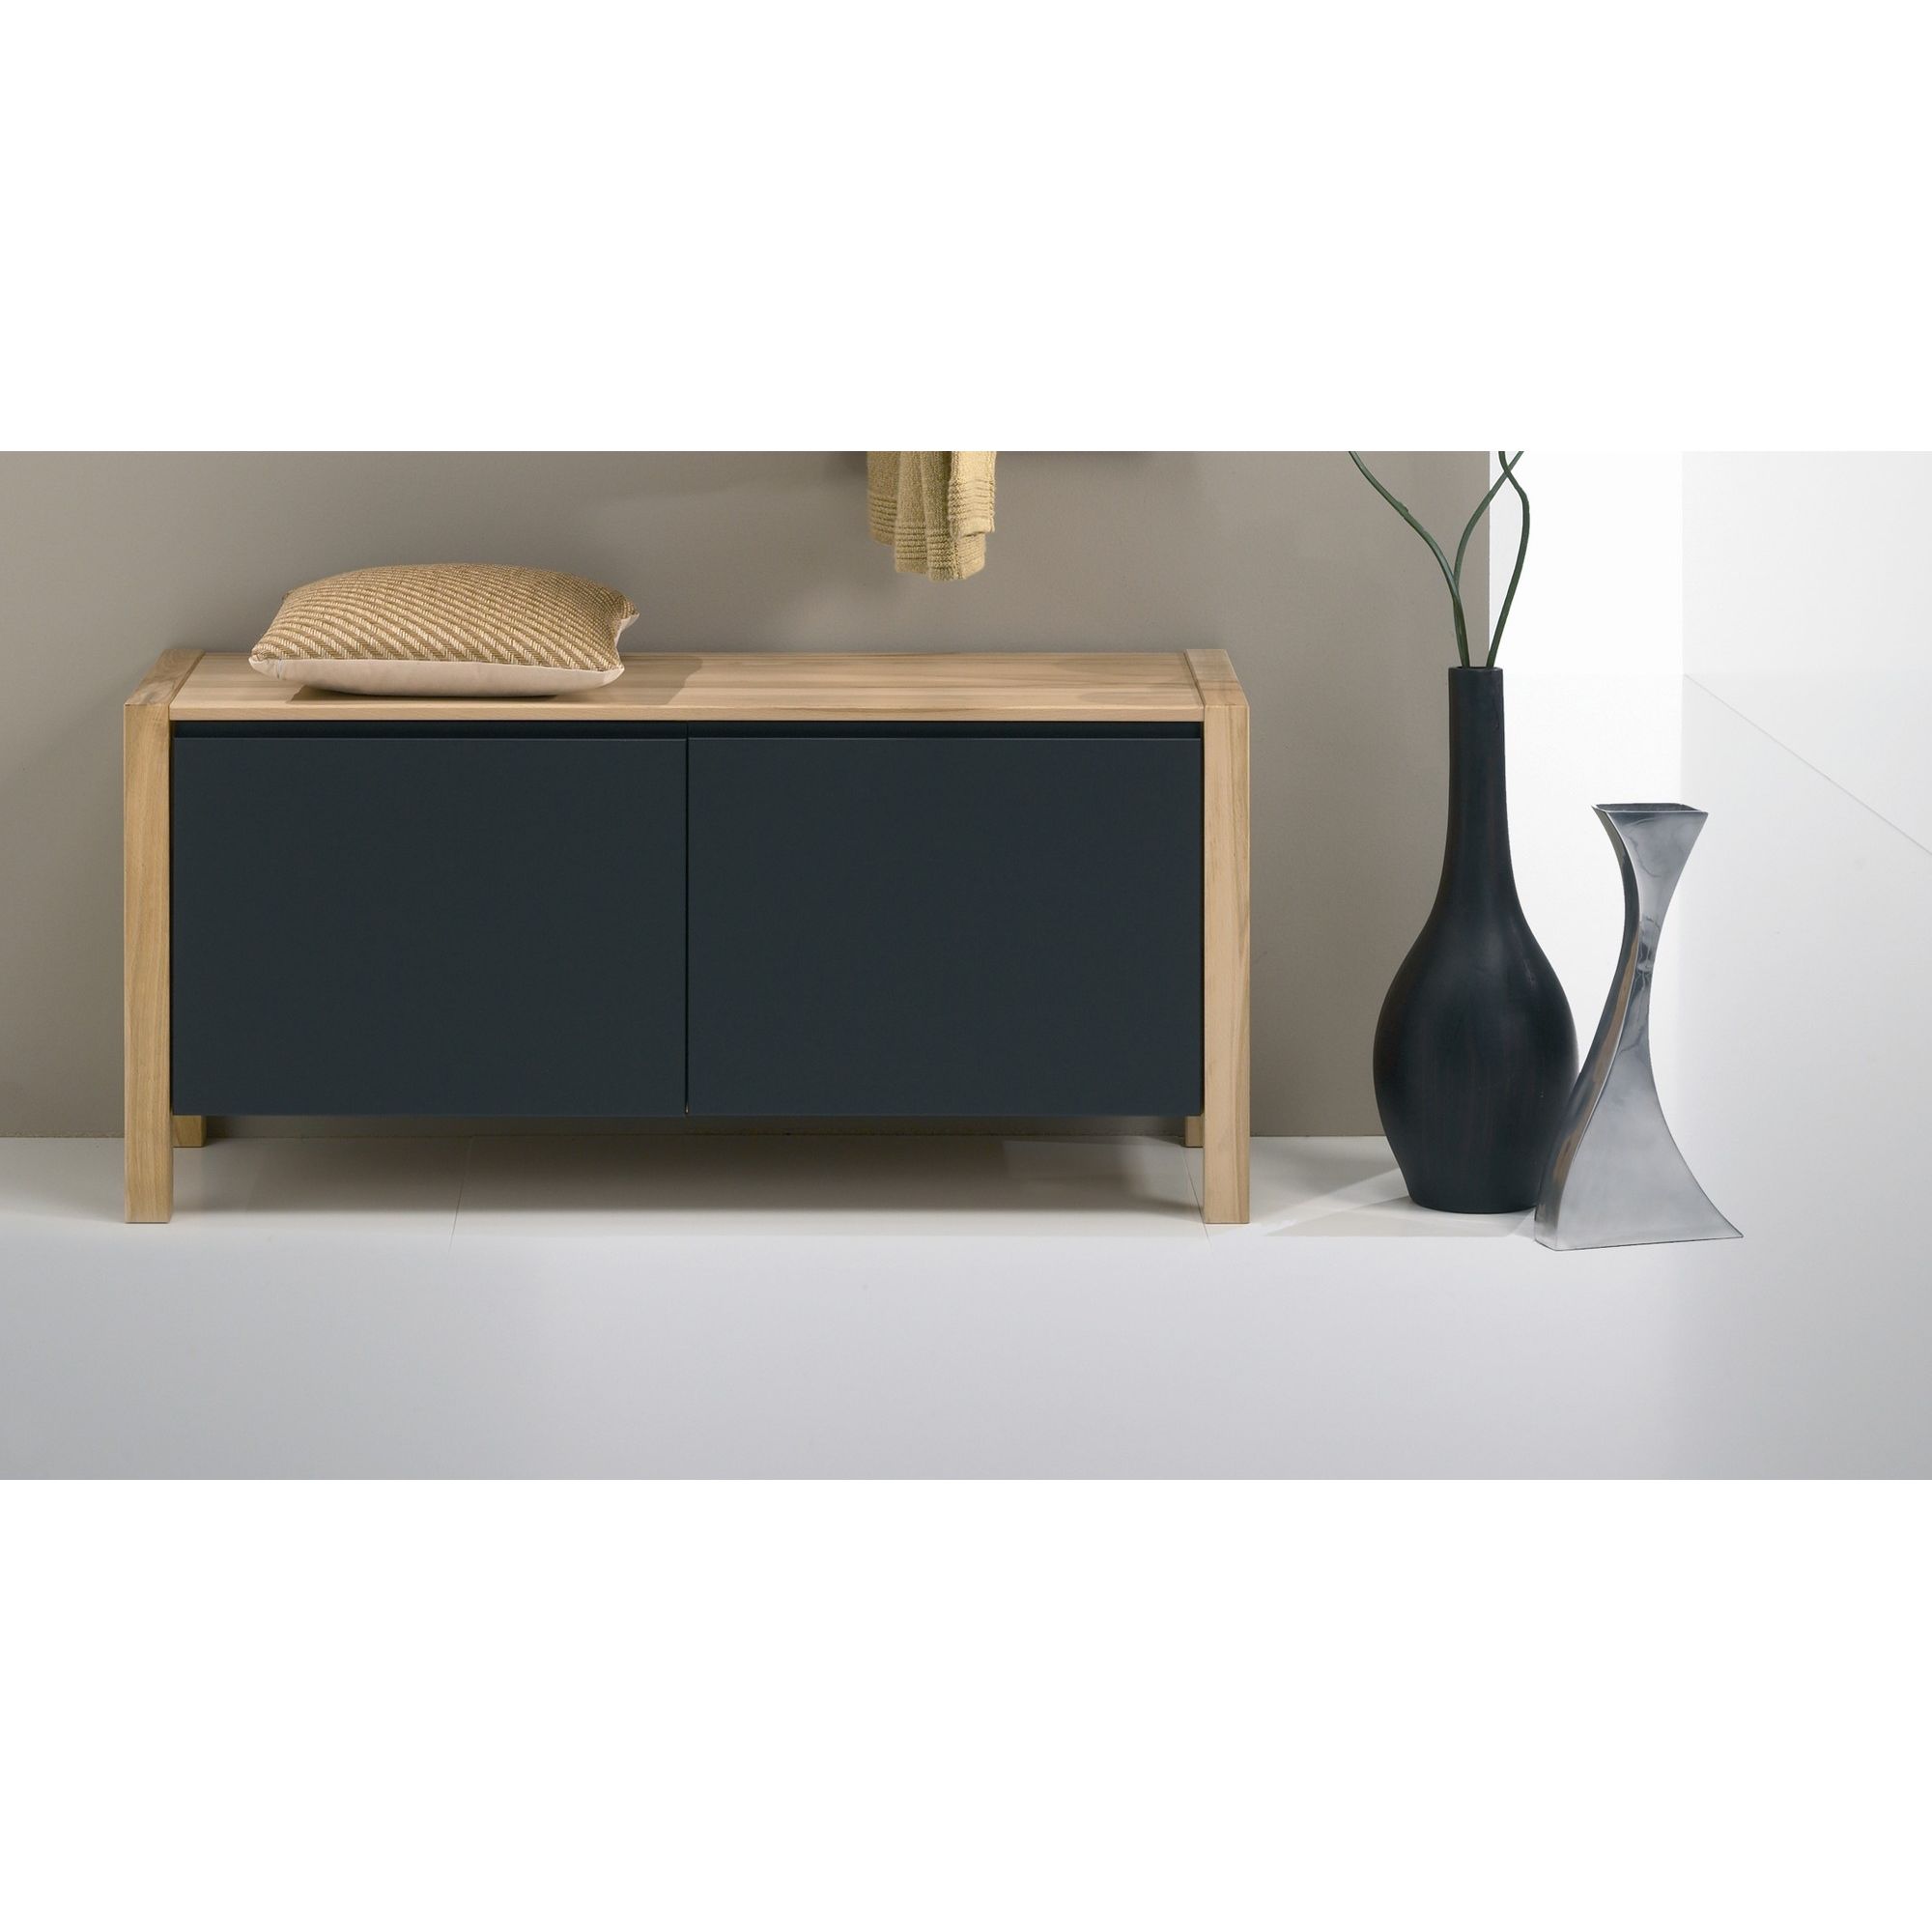 Oestergaard Mille Low Sideboard 109cm - Heartwood Beech solid at Tesco Direct